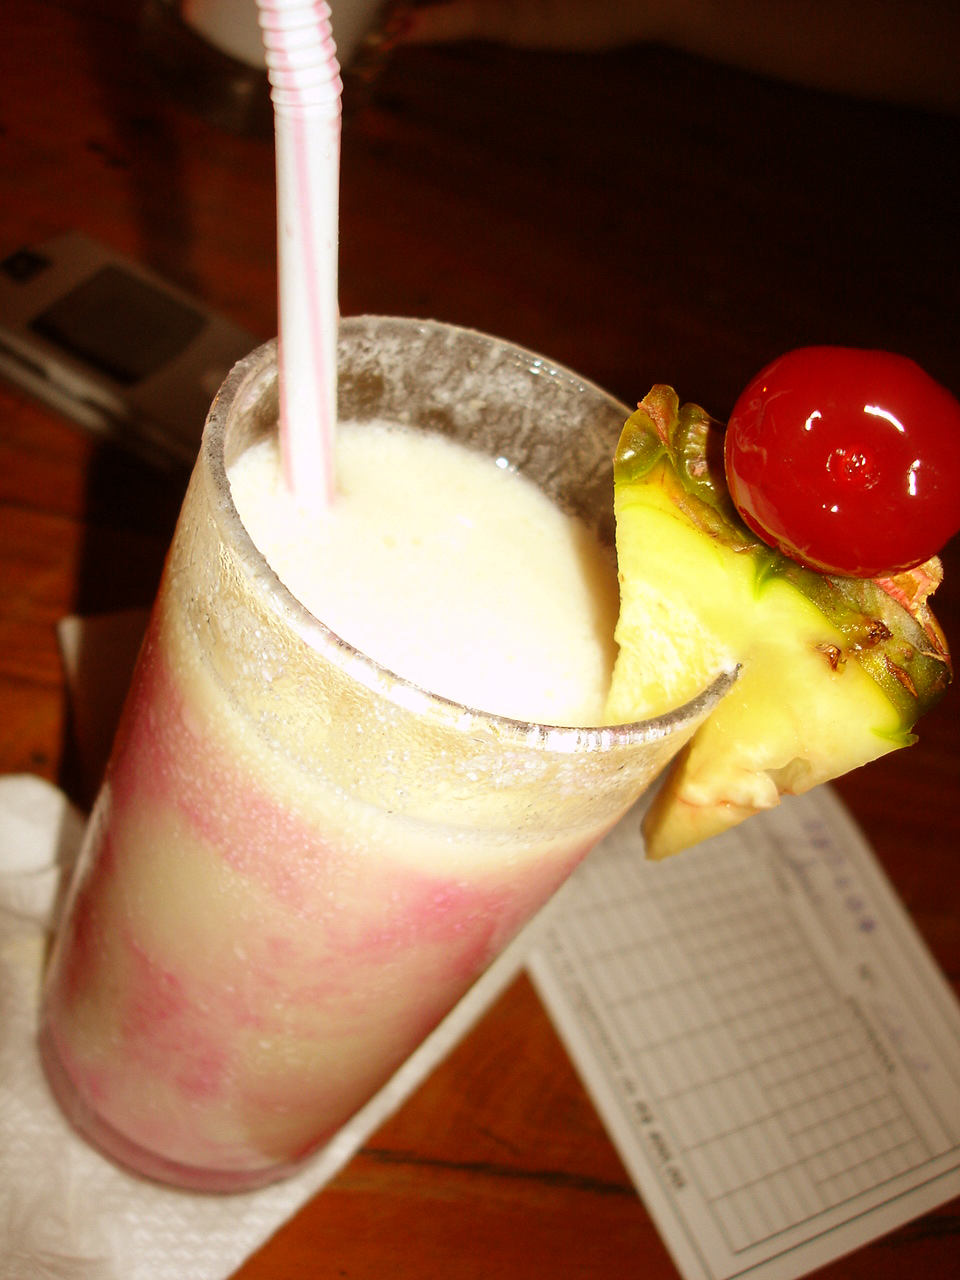 a very tasty looking drink with a cherry and a slice of pineapple